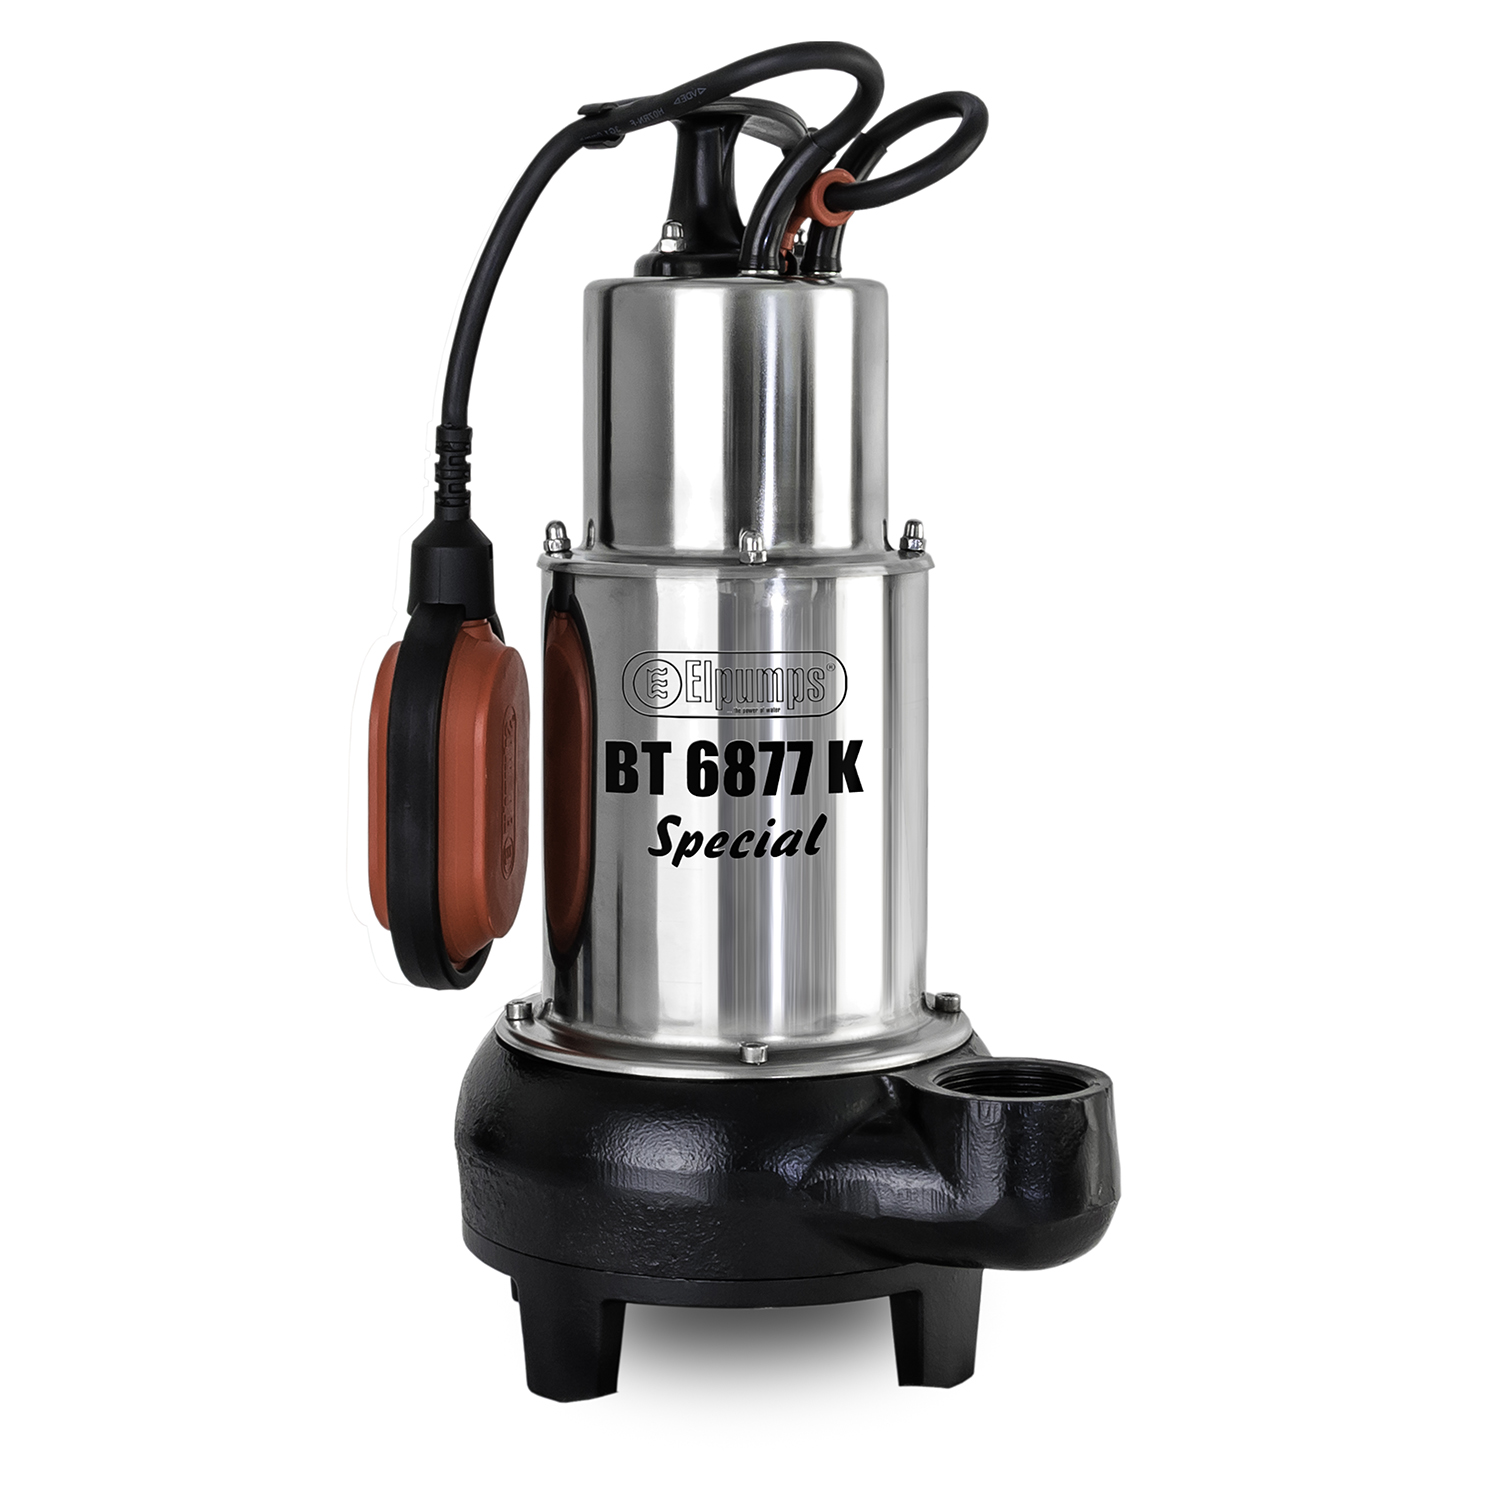 BT 6877 K SPECIAL Submersible cutter pump for sewage